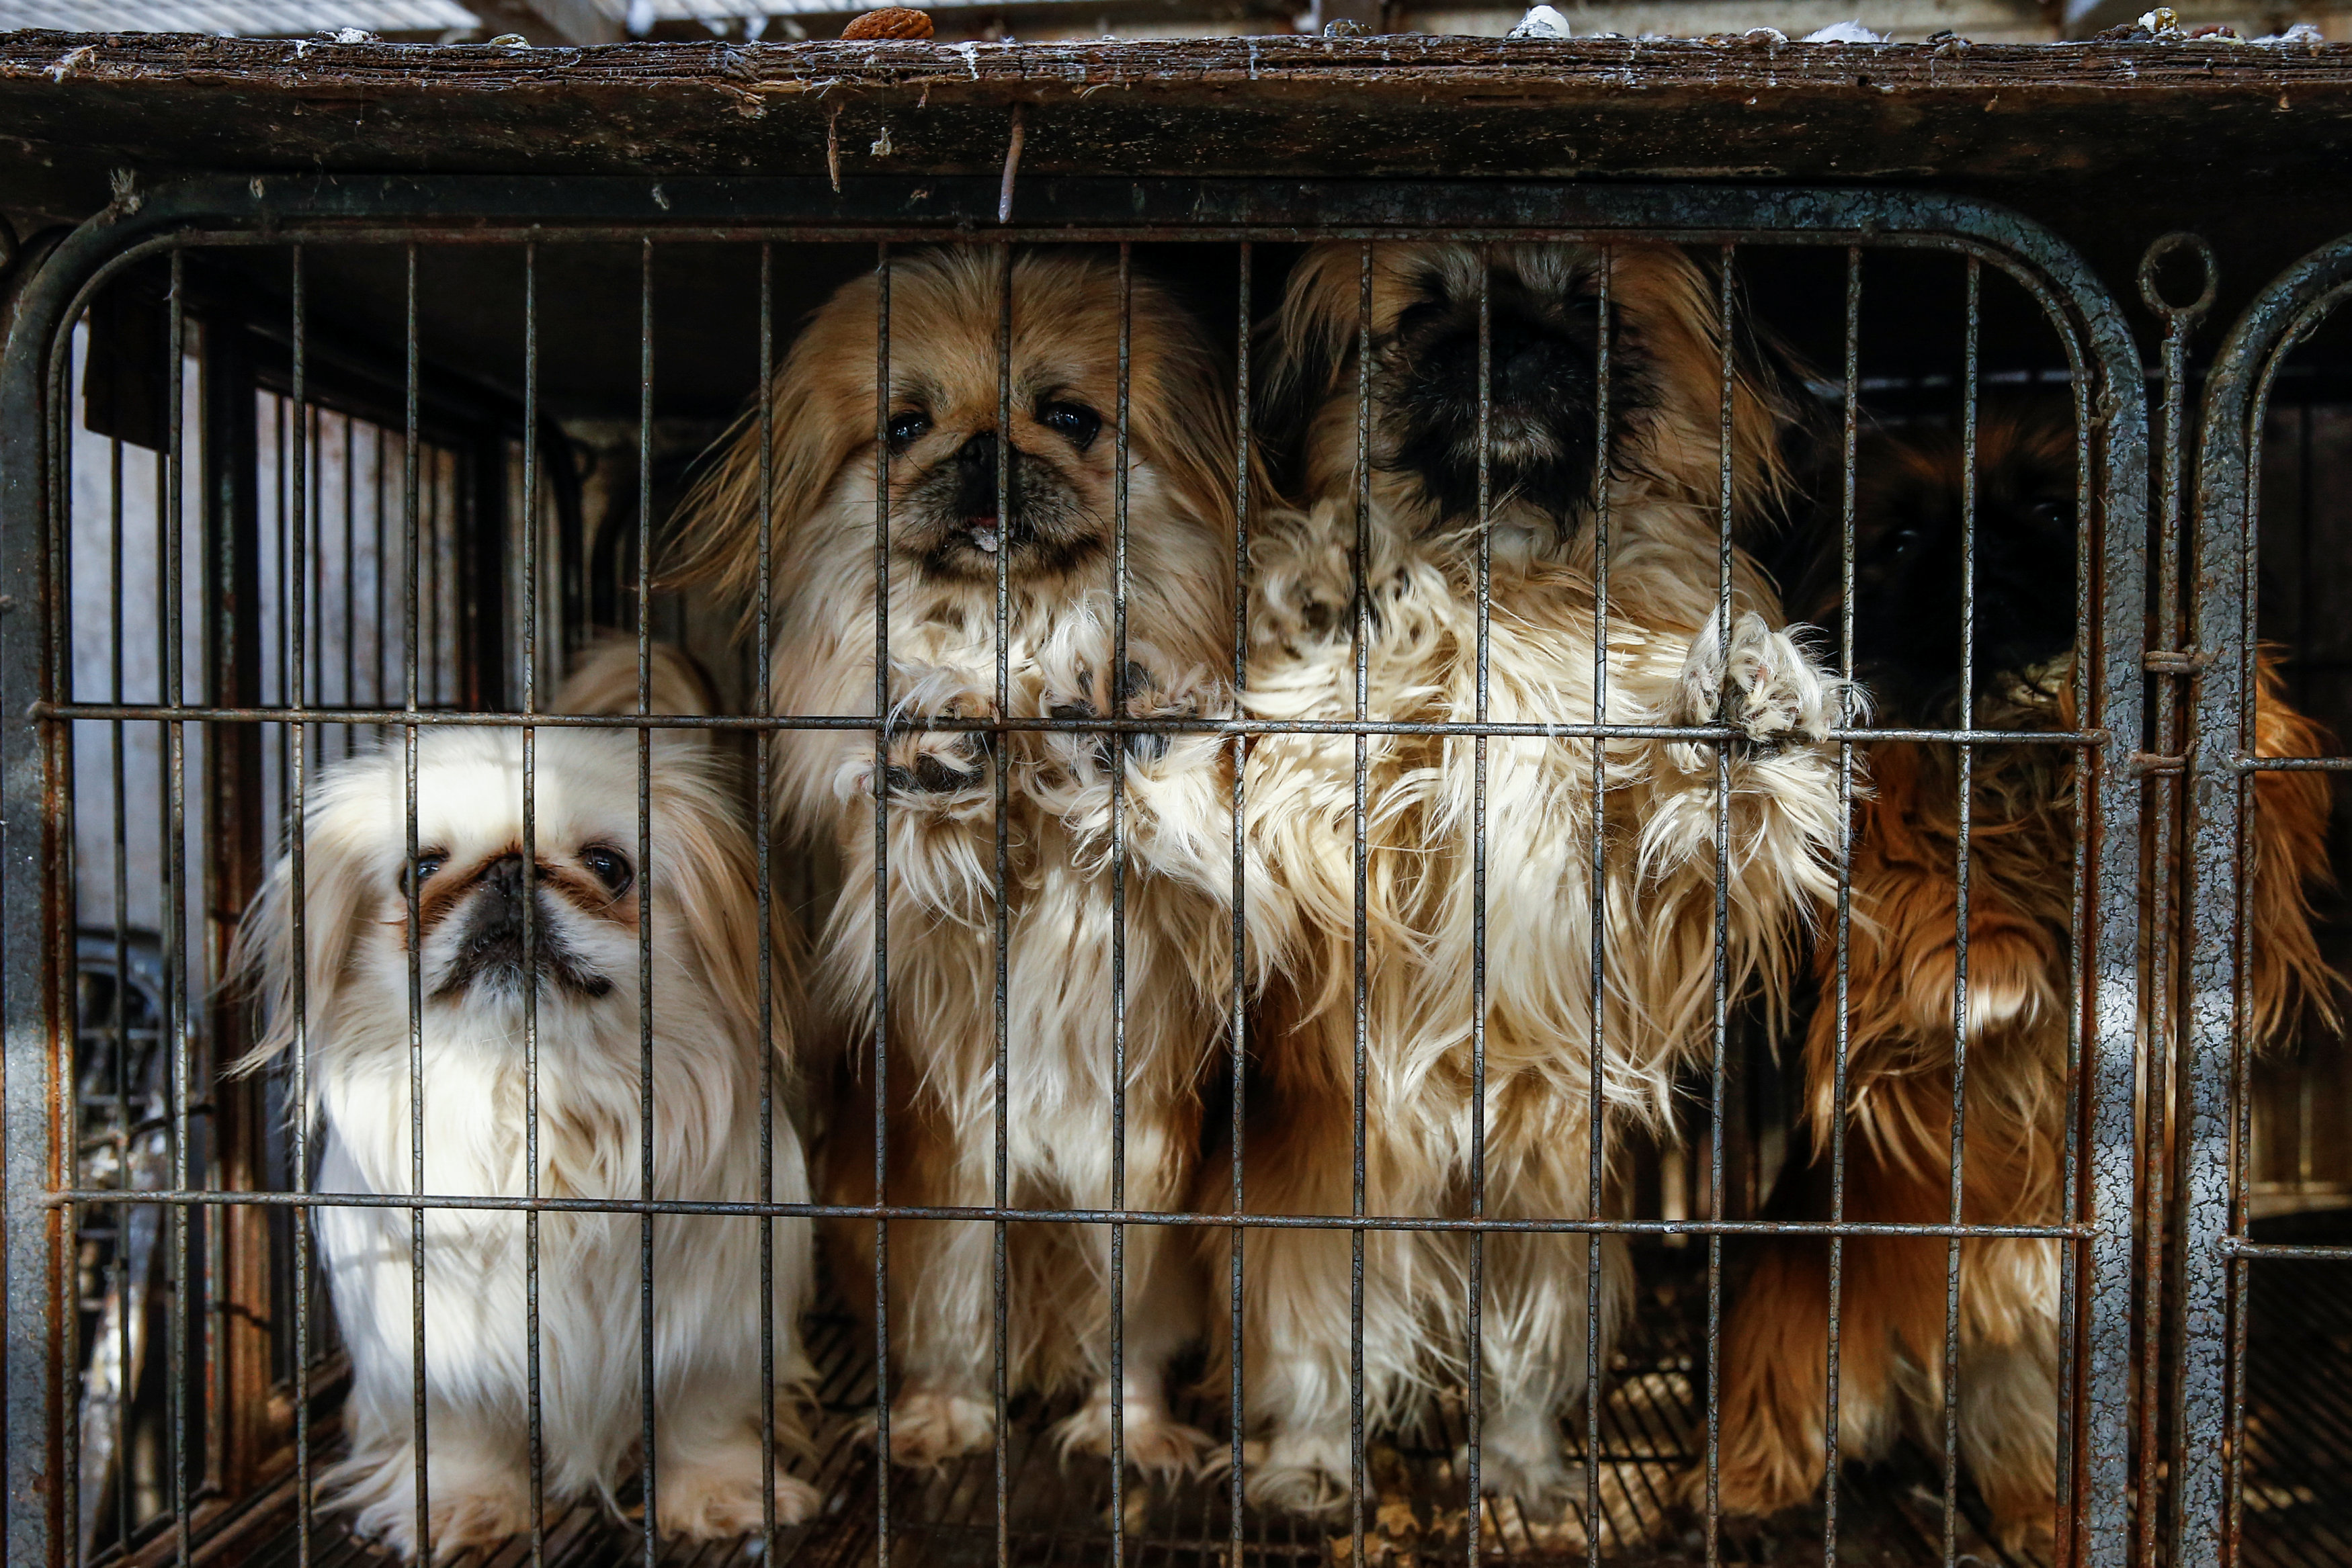 Local-bred Pekingese dogs stand in a cage at the compound of a local animal breeder Zhang Lei in Beijing, China, January 11, 2018. Picture taken January 11, 2018.  REUTERS/Thomas Peter